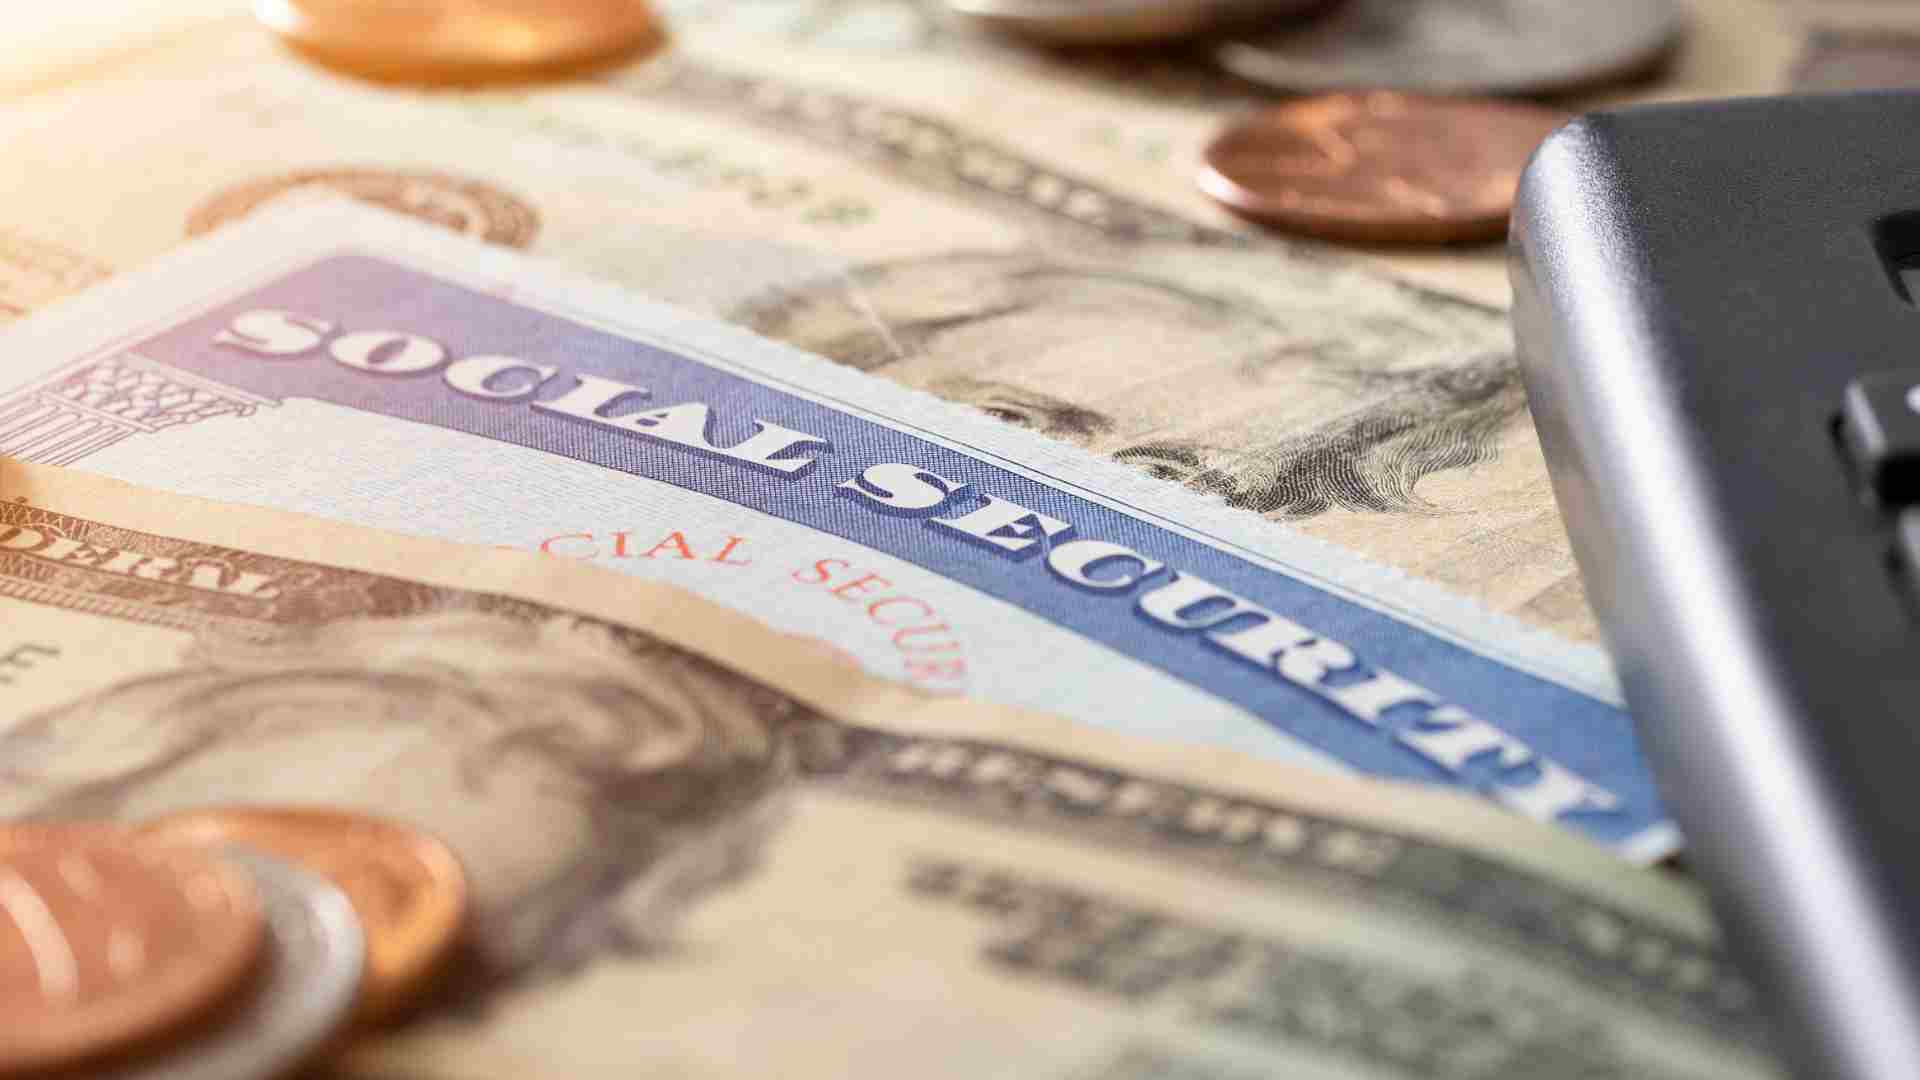 Social Security will soon send your monthly payment for SSDI disability benefits and retirement beneficiaries says the Government